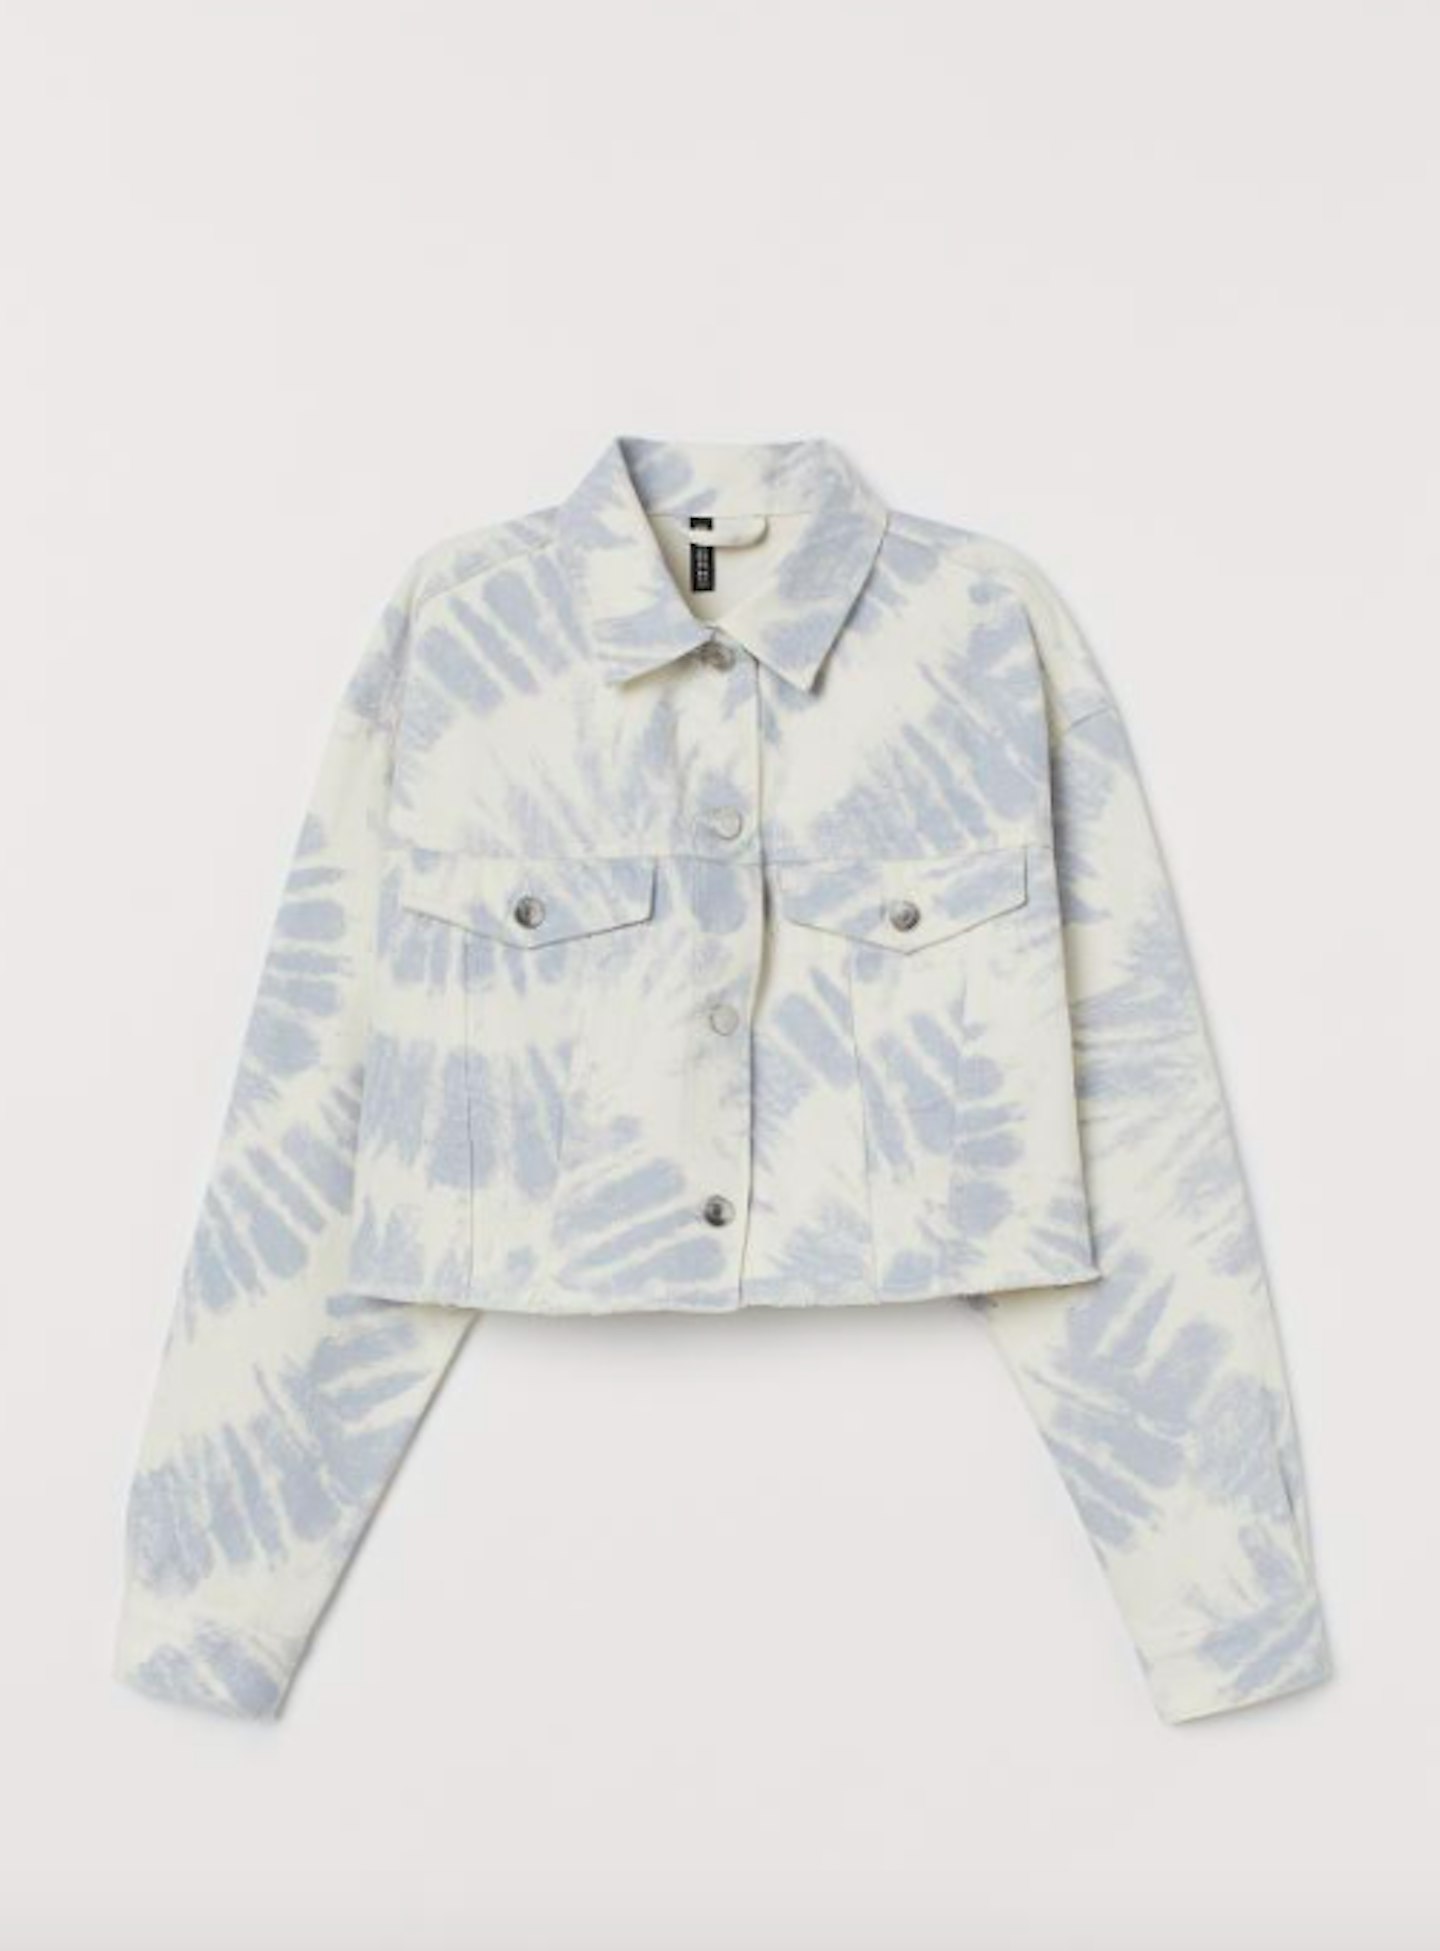 H&M, Cropped Jackets, £19.99